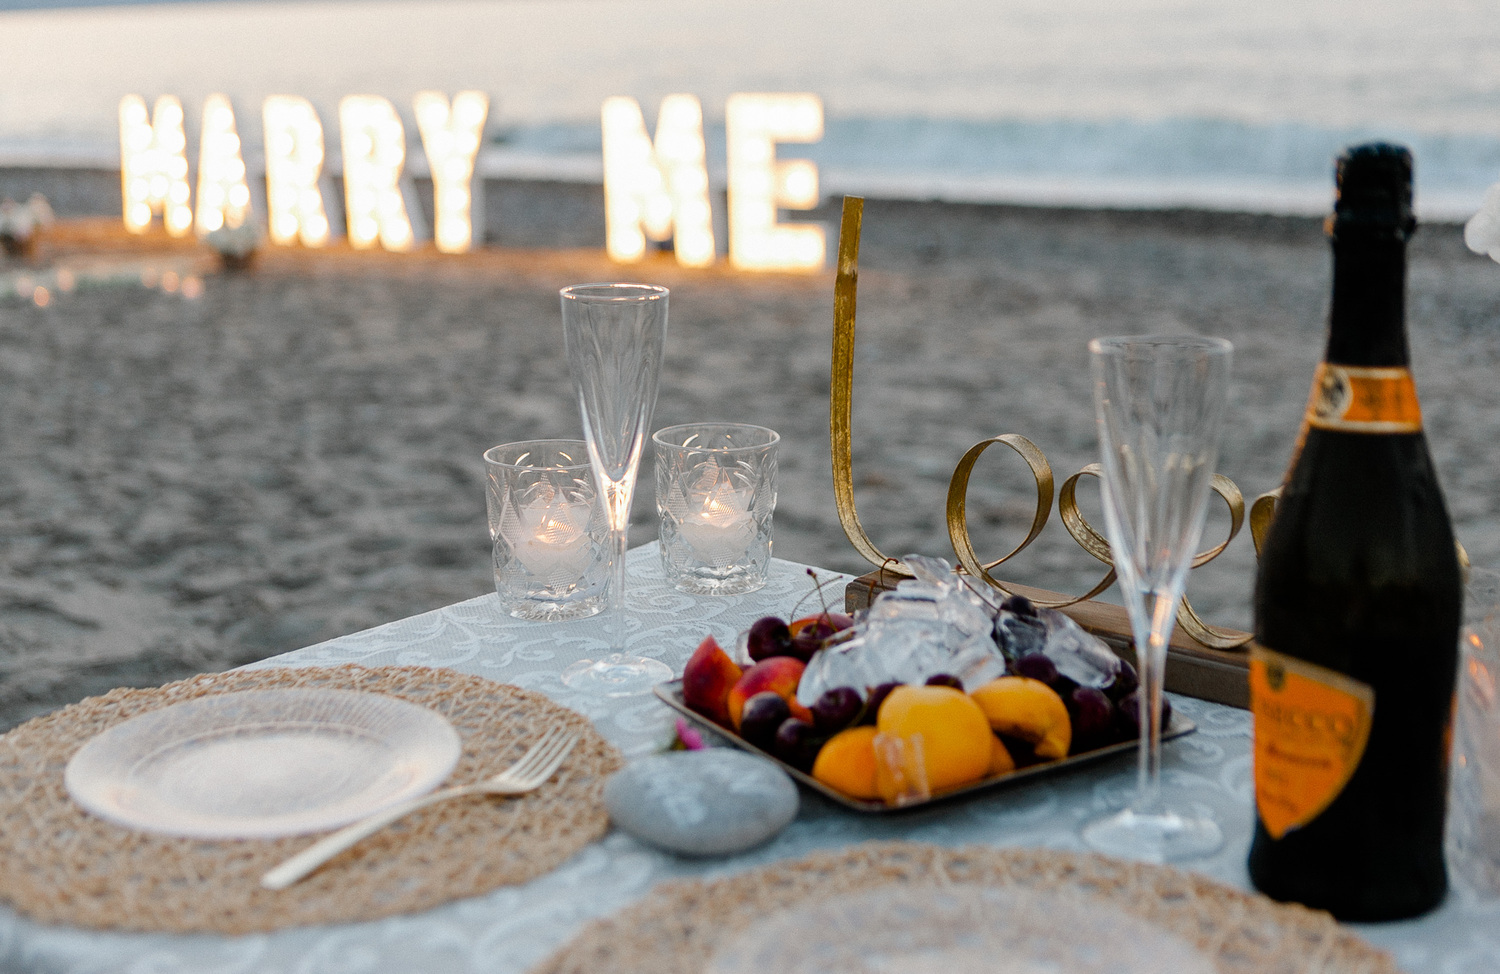 Crete marriage proposal on the beach